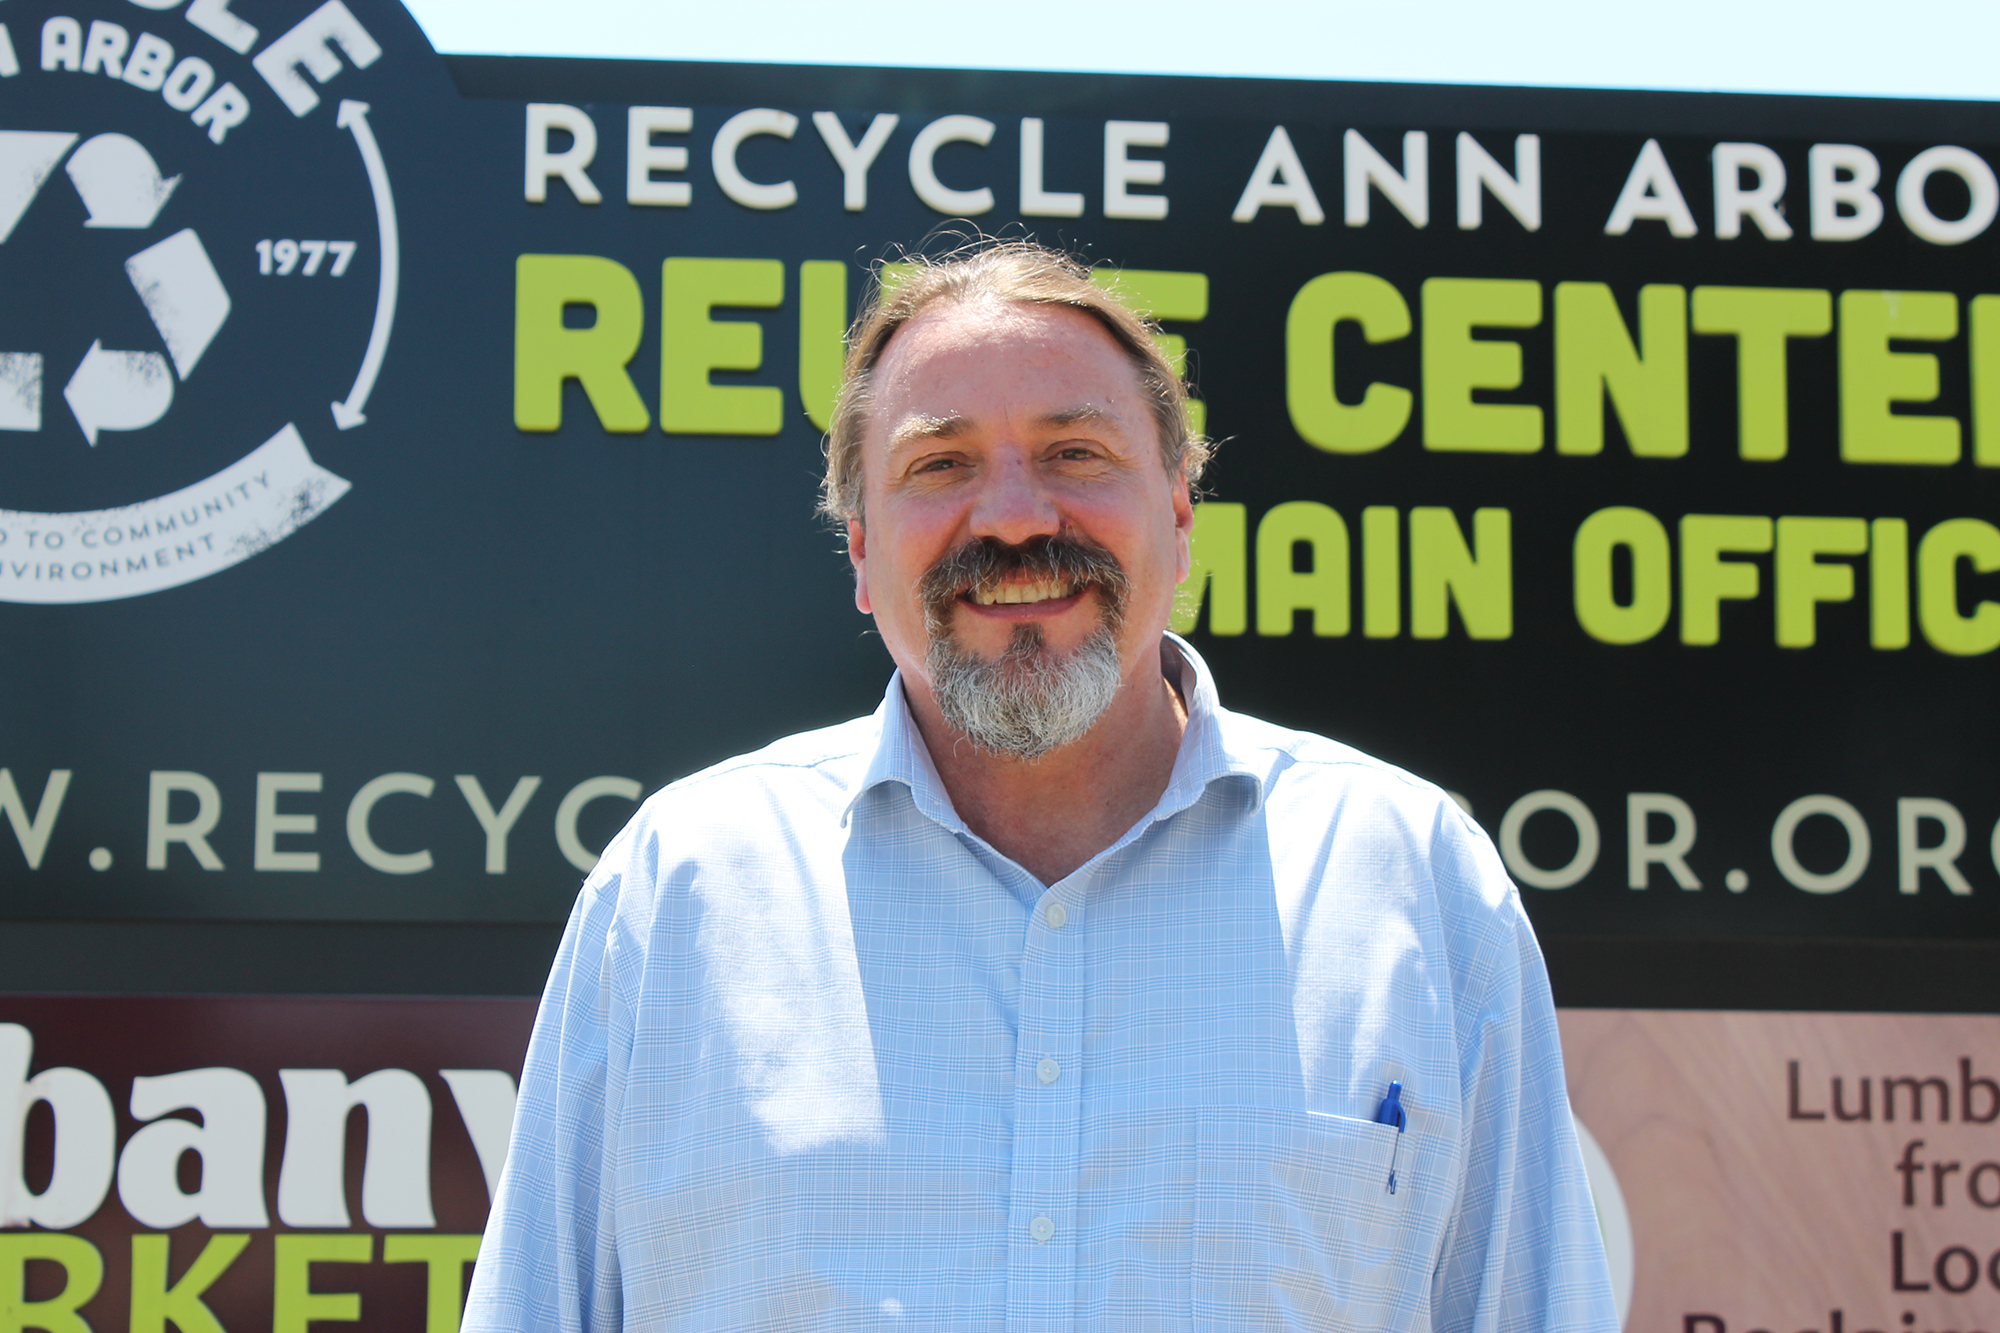 Recycle Ann Arbor Announces Hiring of Nationally Prominent Recycling Industry Leader as New CEO  